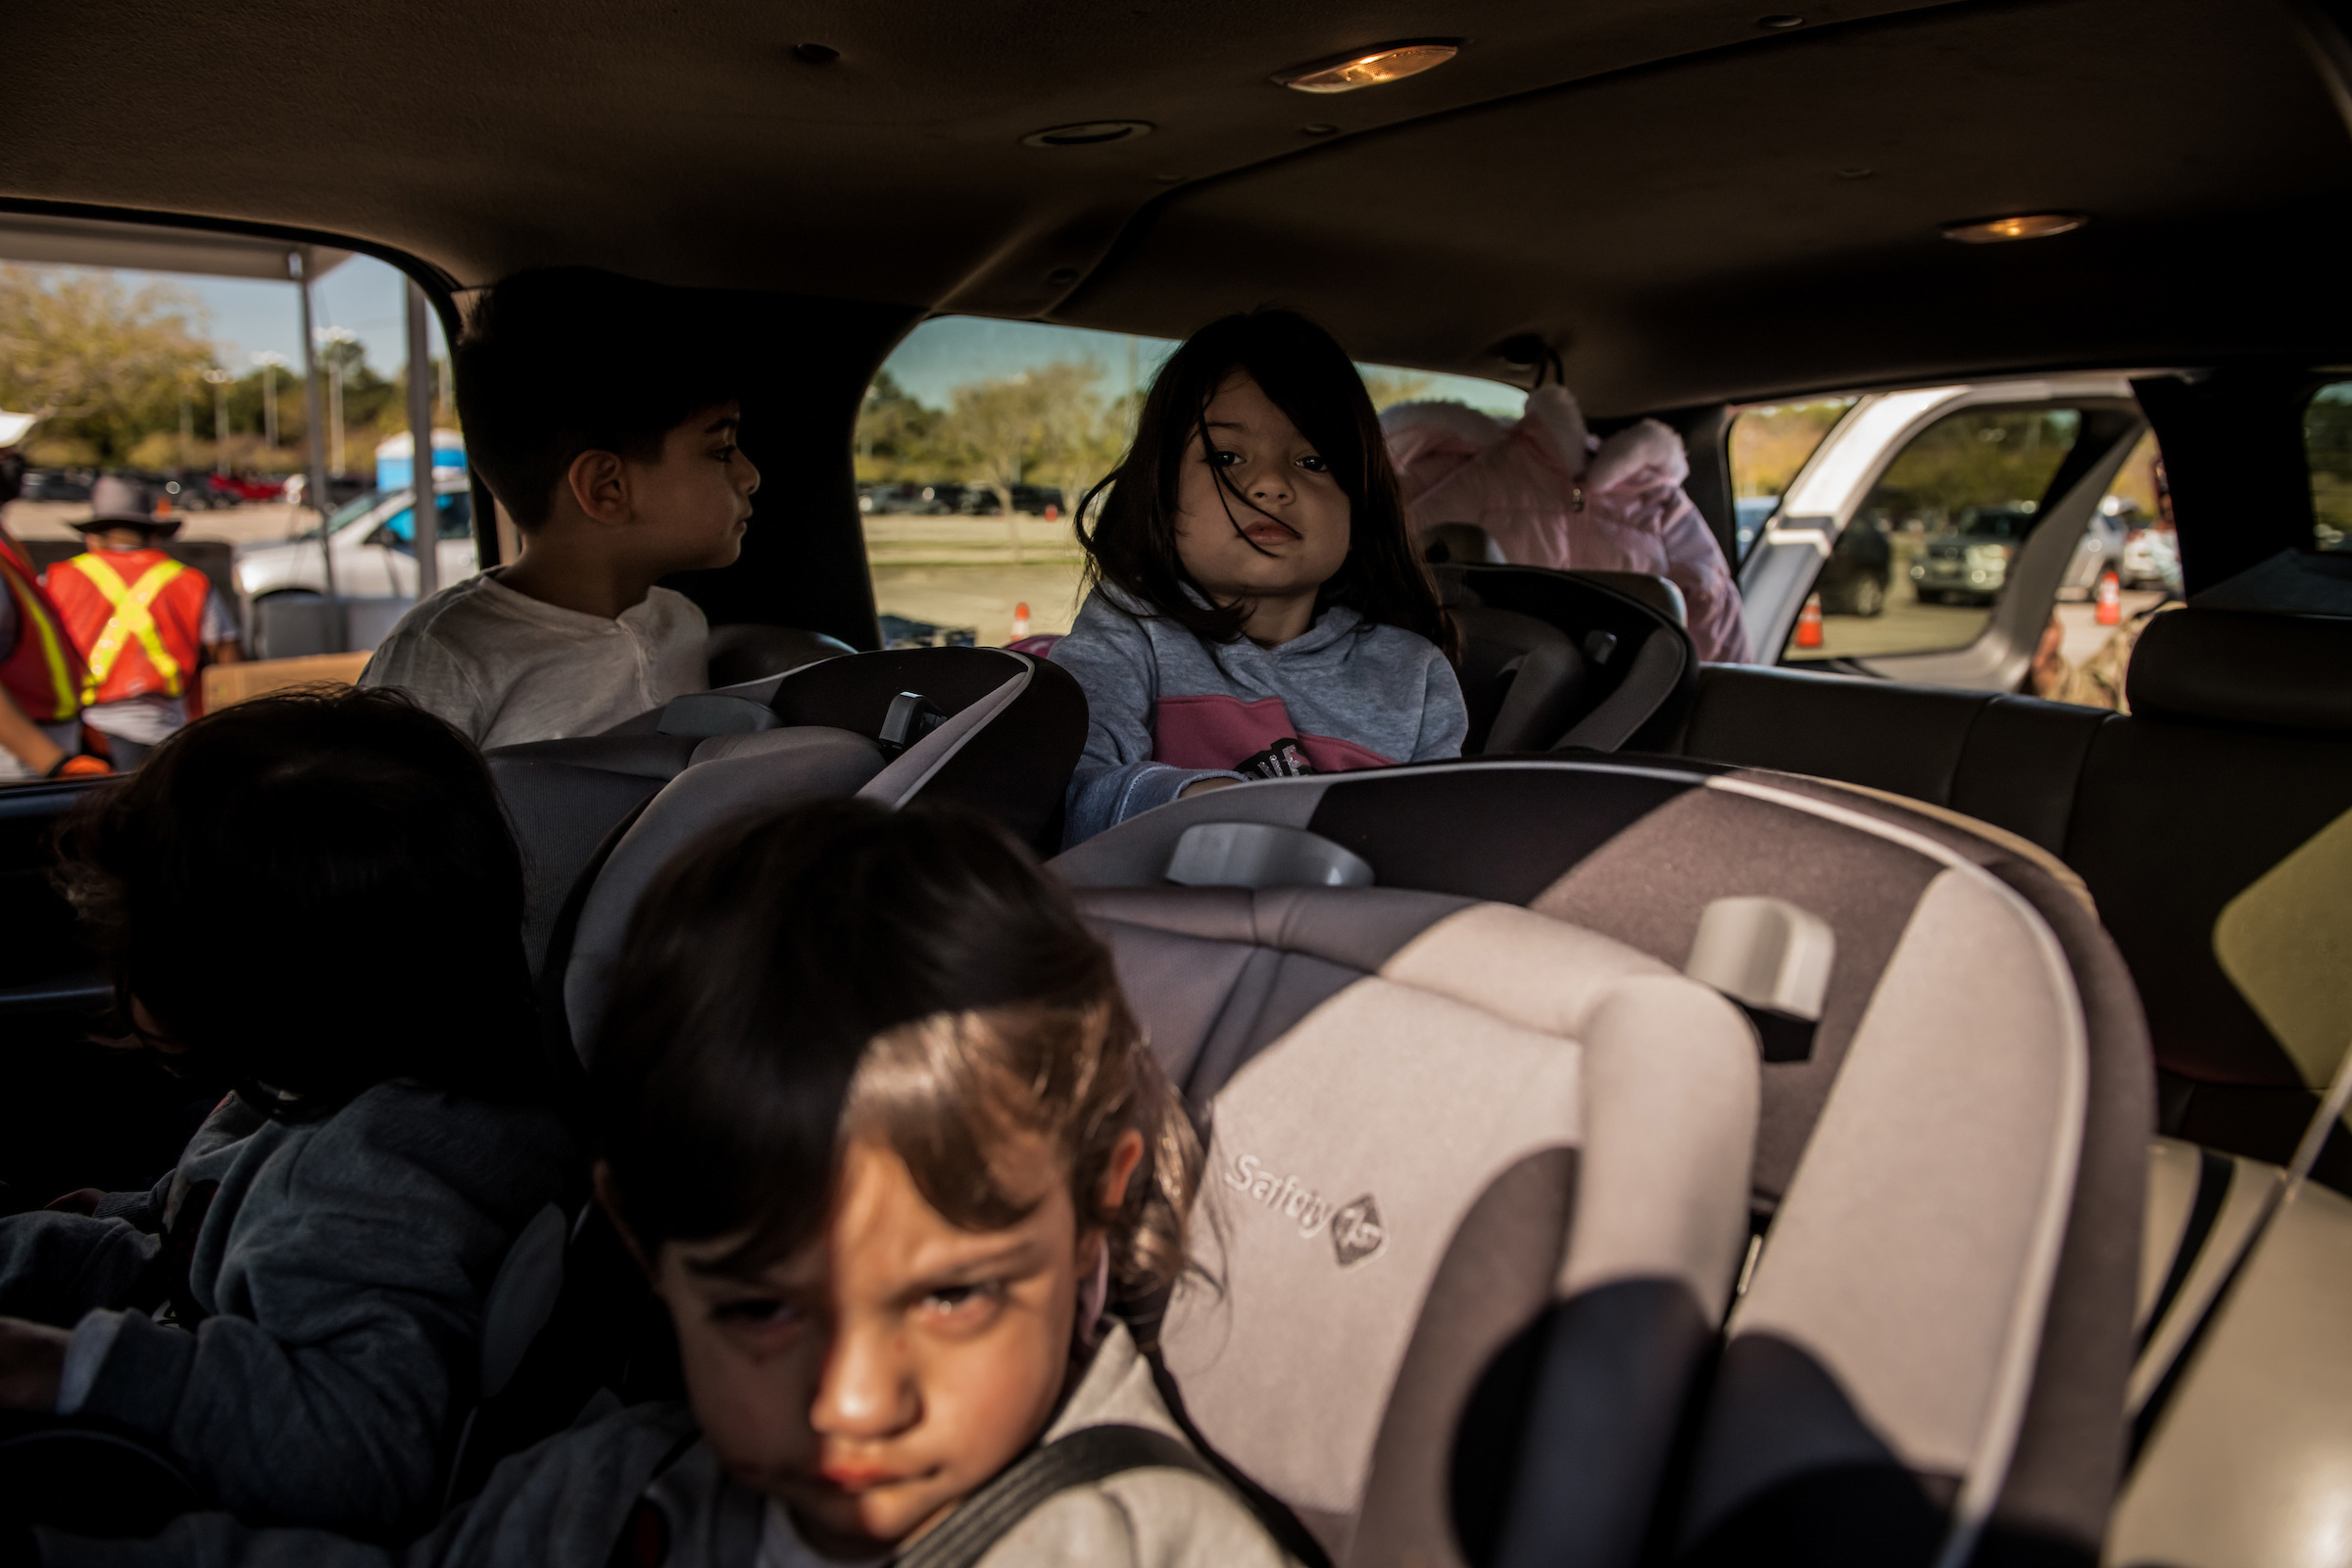 Children at the food distribution site run by the Houston Food Bank. (Meridith Kohut for TIME)